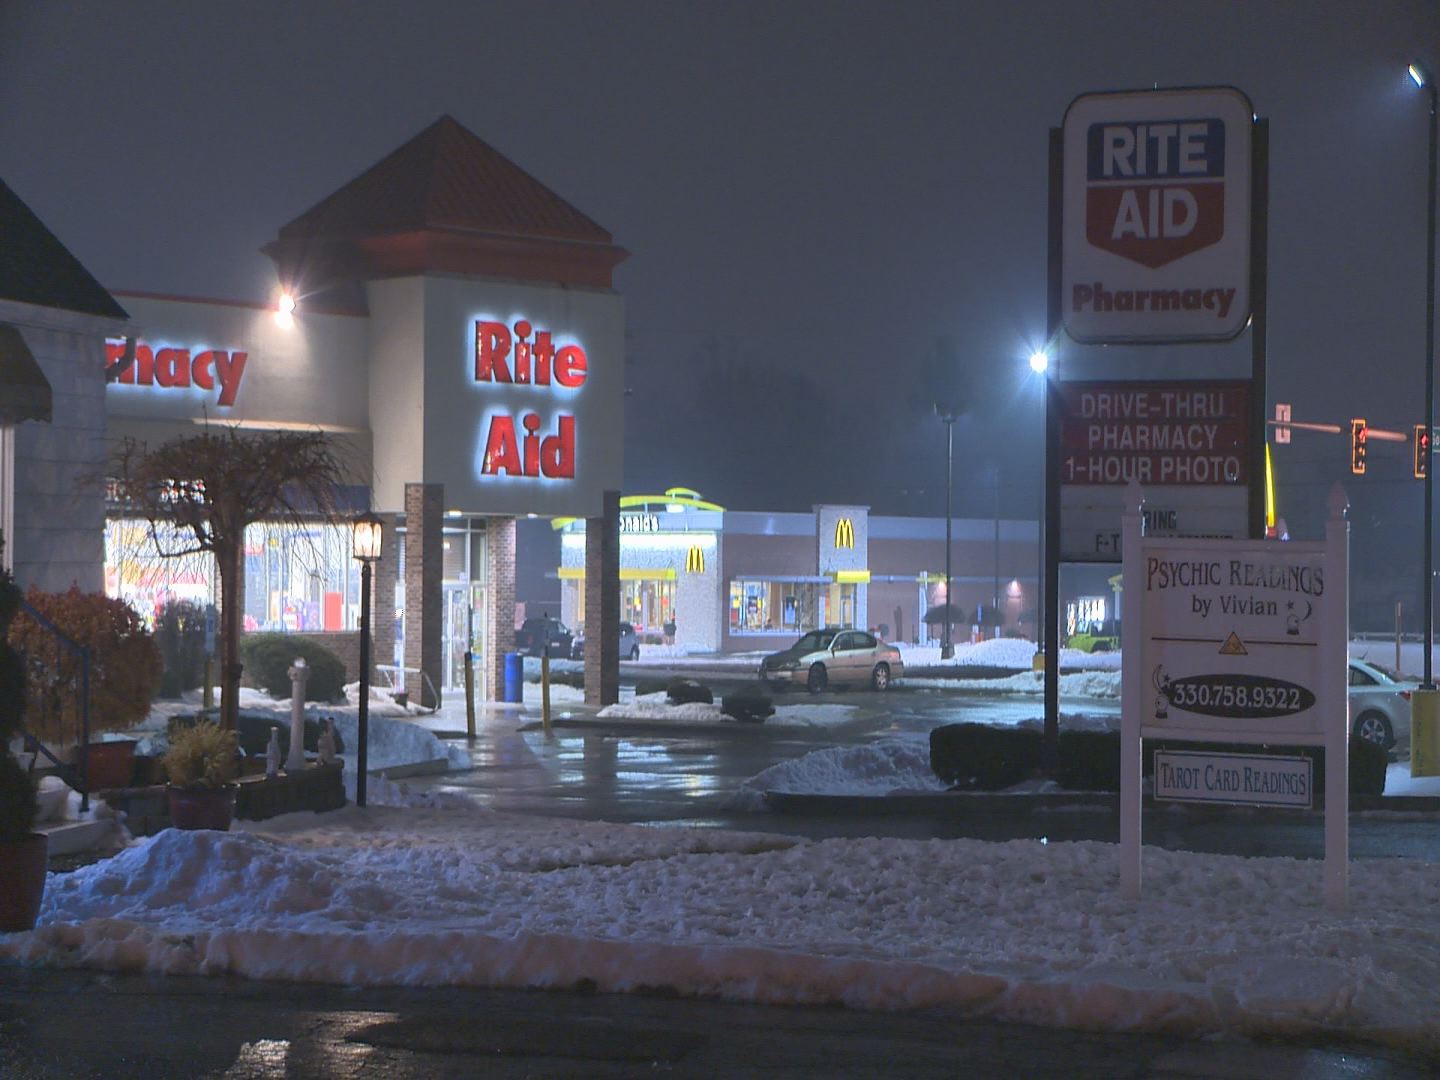 Youngstown Rite Aid robbed, suspect could be armed - WFMJ.com News weather sports for ...1440 x 1080